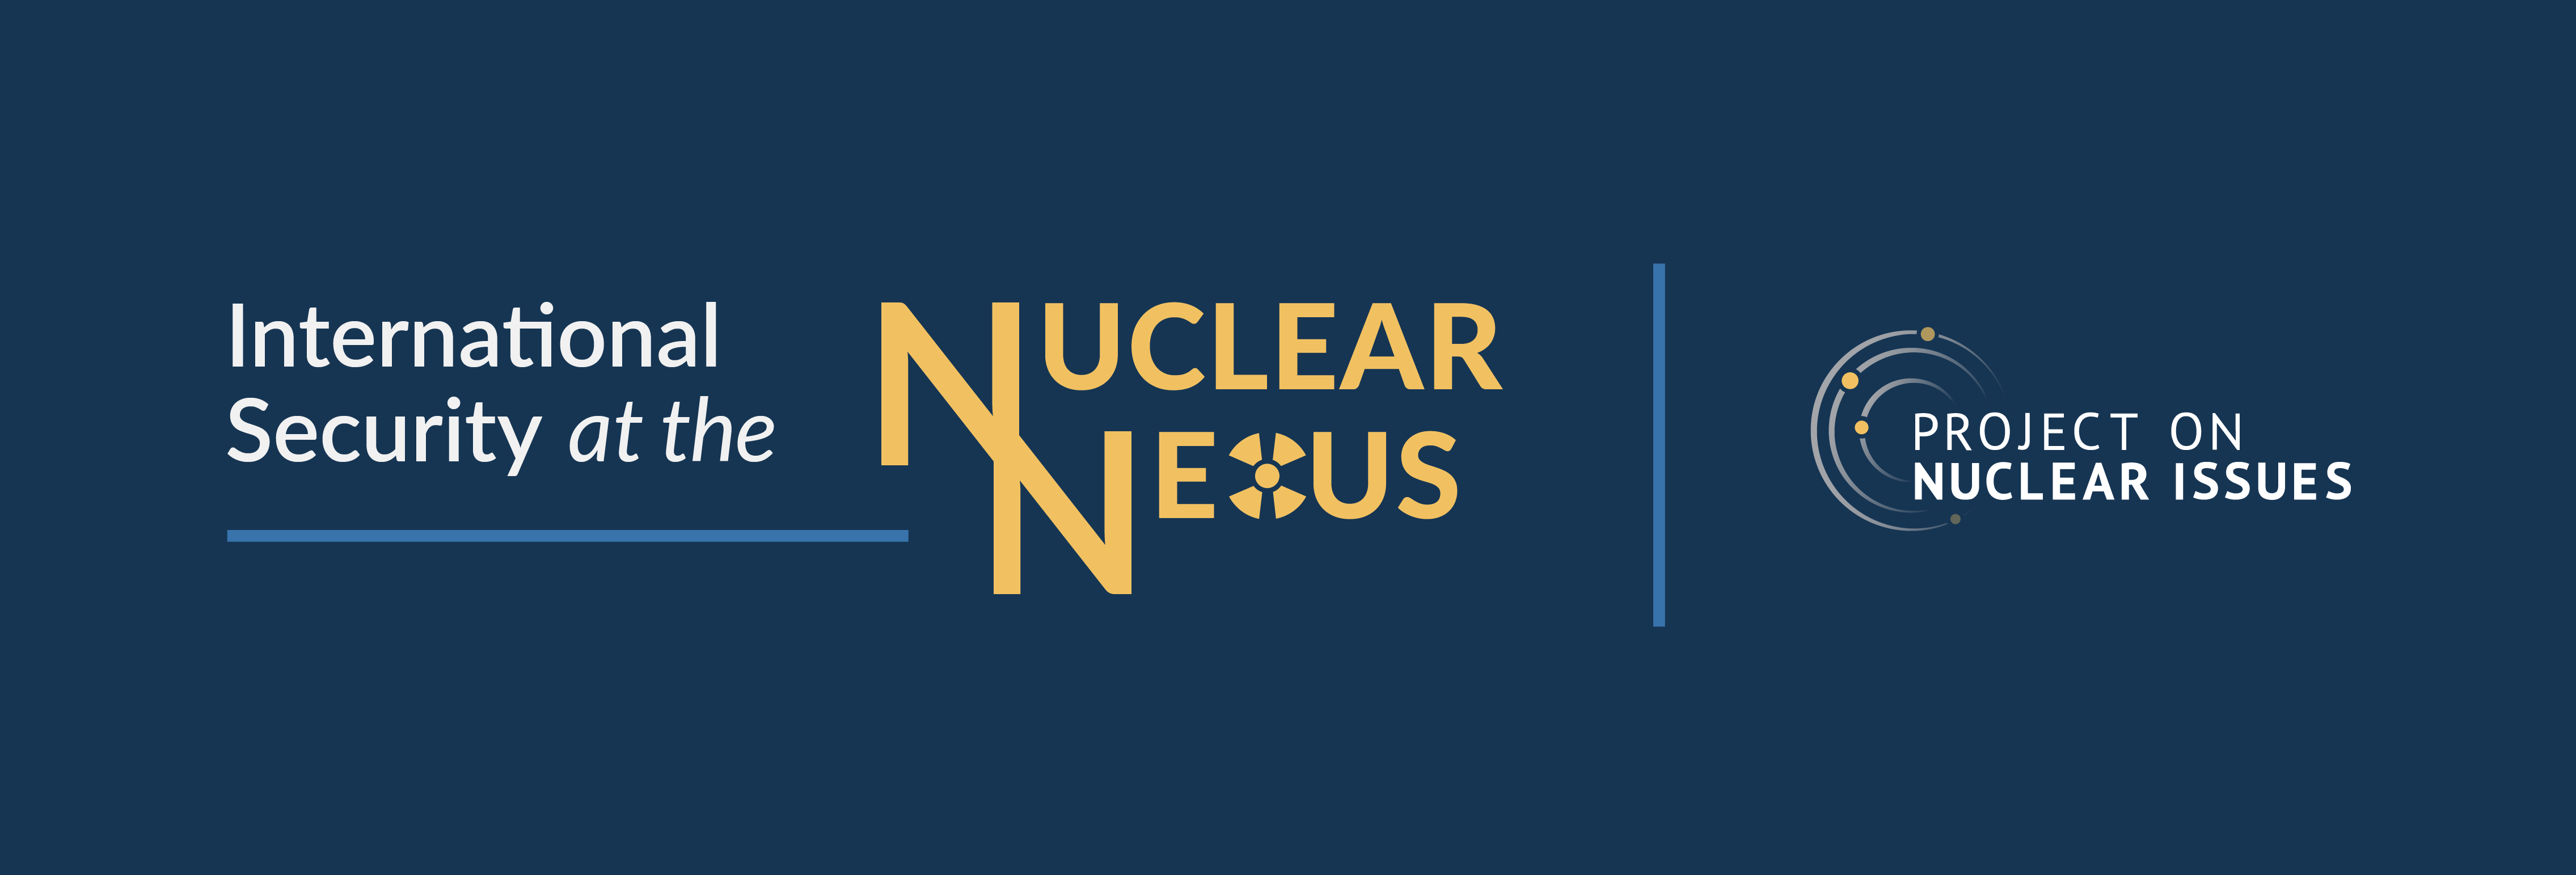 International Security at the Nuclear Nexus